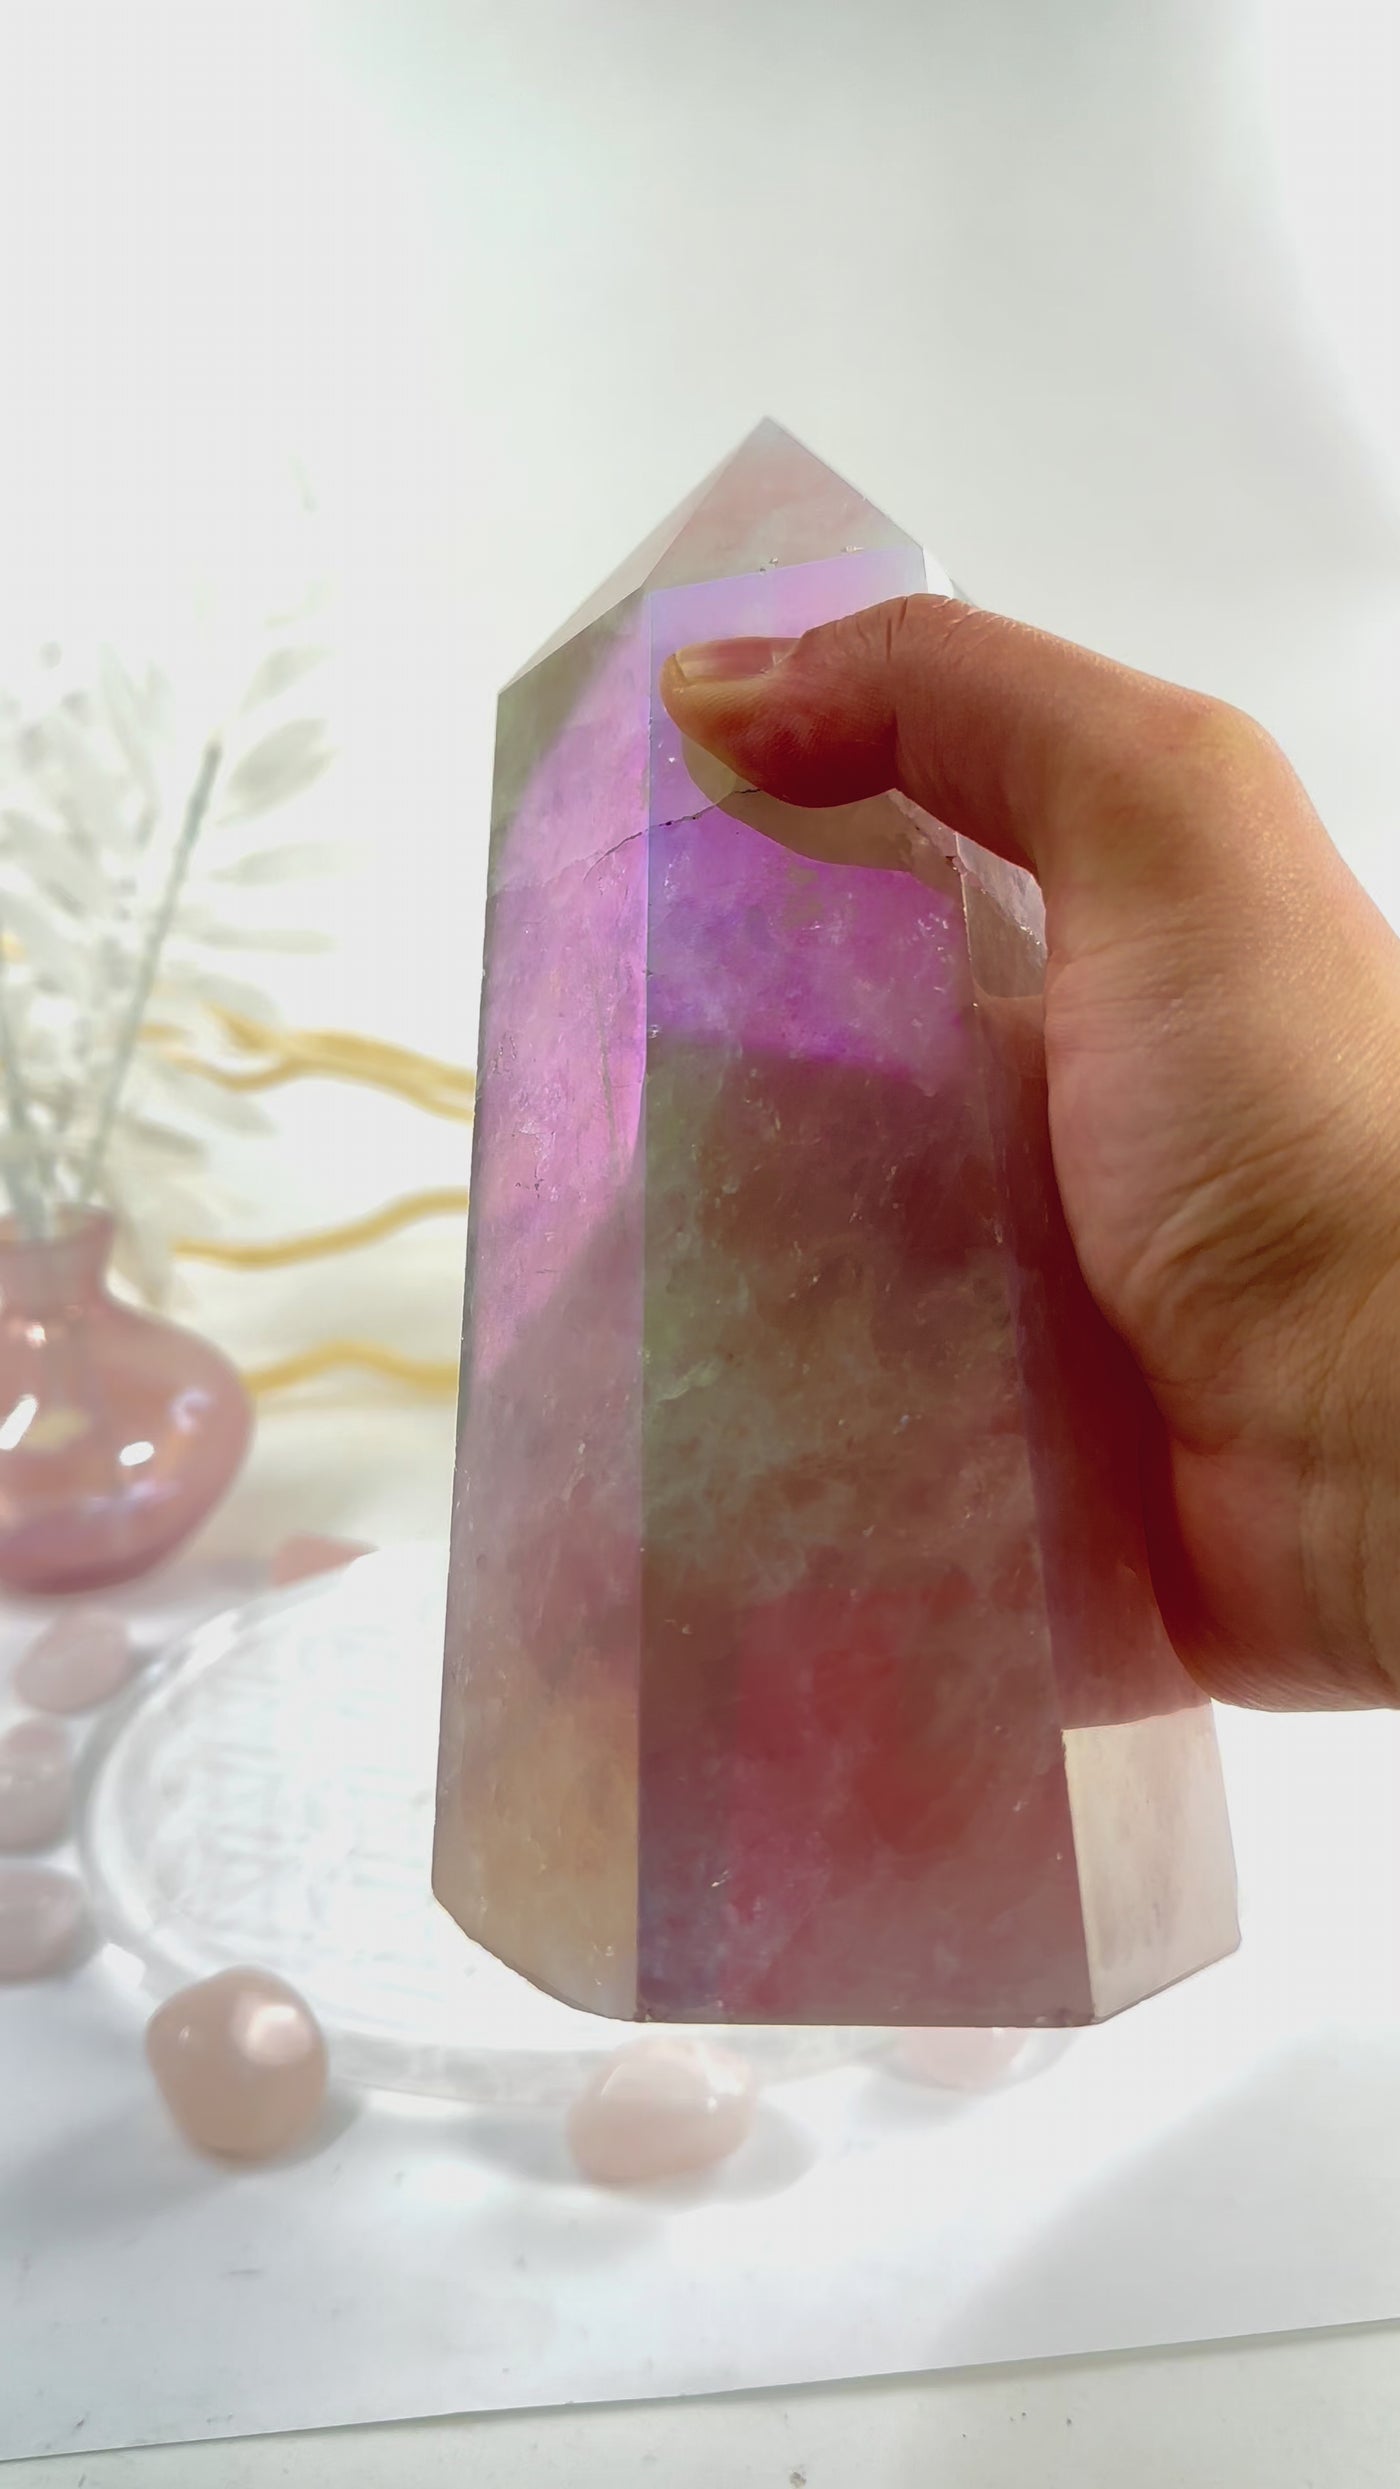 Angel Aura Rose Quartz Polished Point with Natural Inclusions video in hand to show iridescence